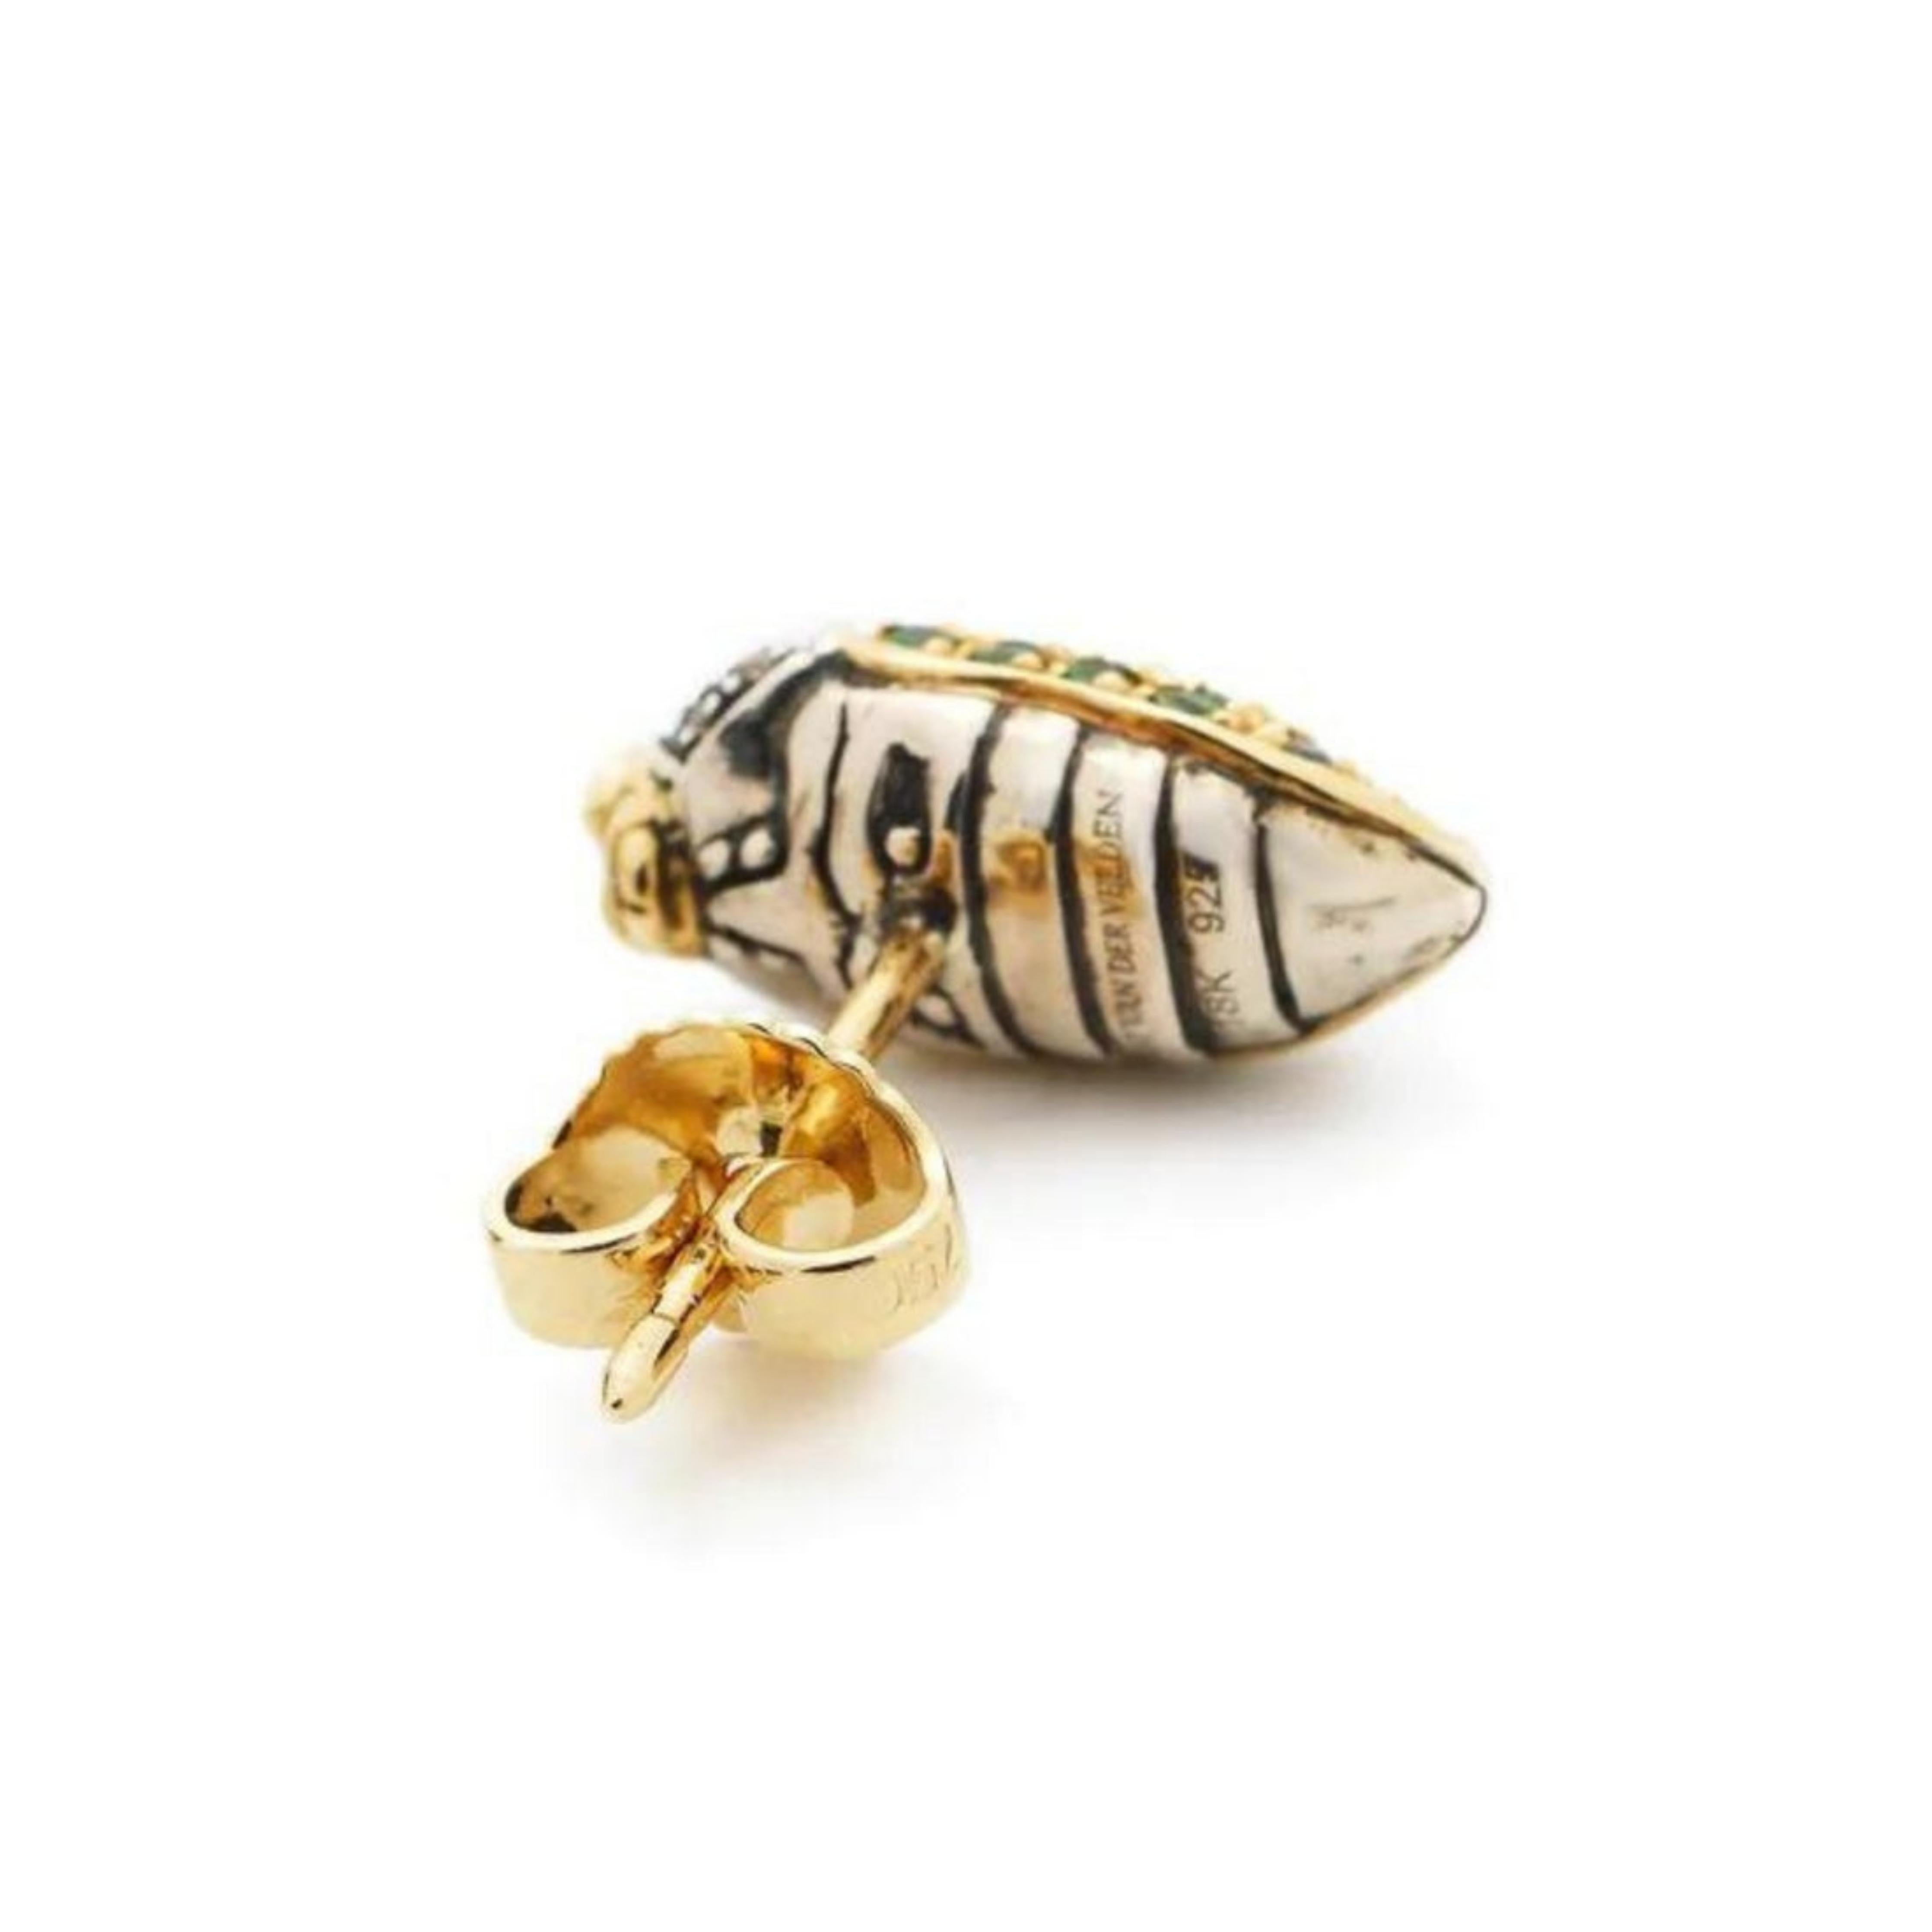 Bibi van der Velden, Mini Scarab Pave Stud. Crafted from 18K yellow gold and sterling silver, this earring features a pave of brown diamonds, tsavorites and yellow sapphires. Shown from behind.